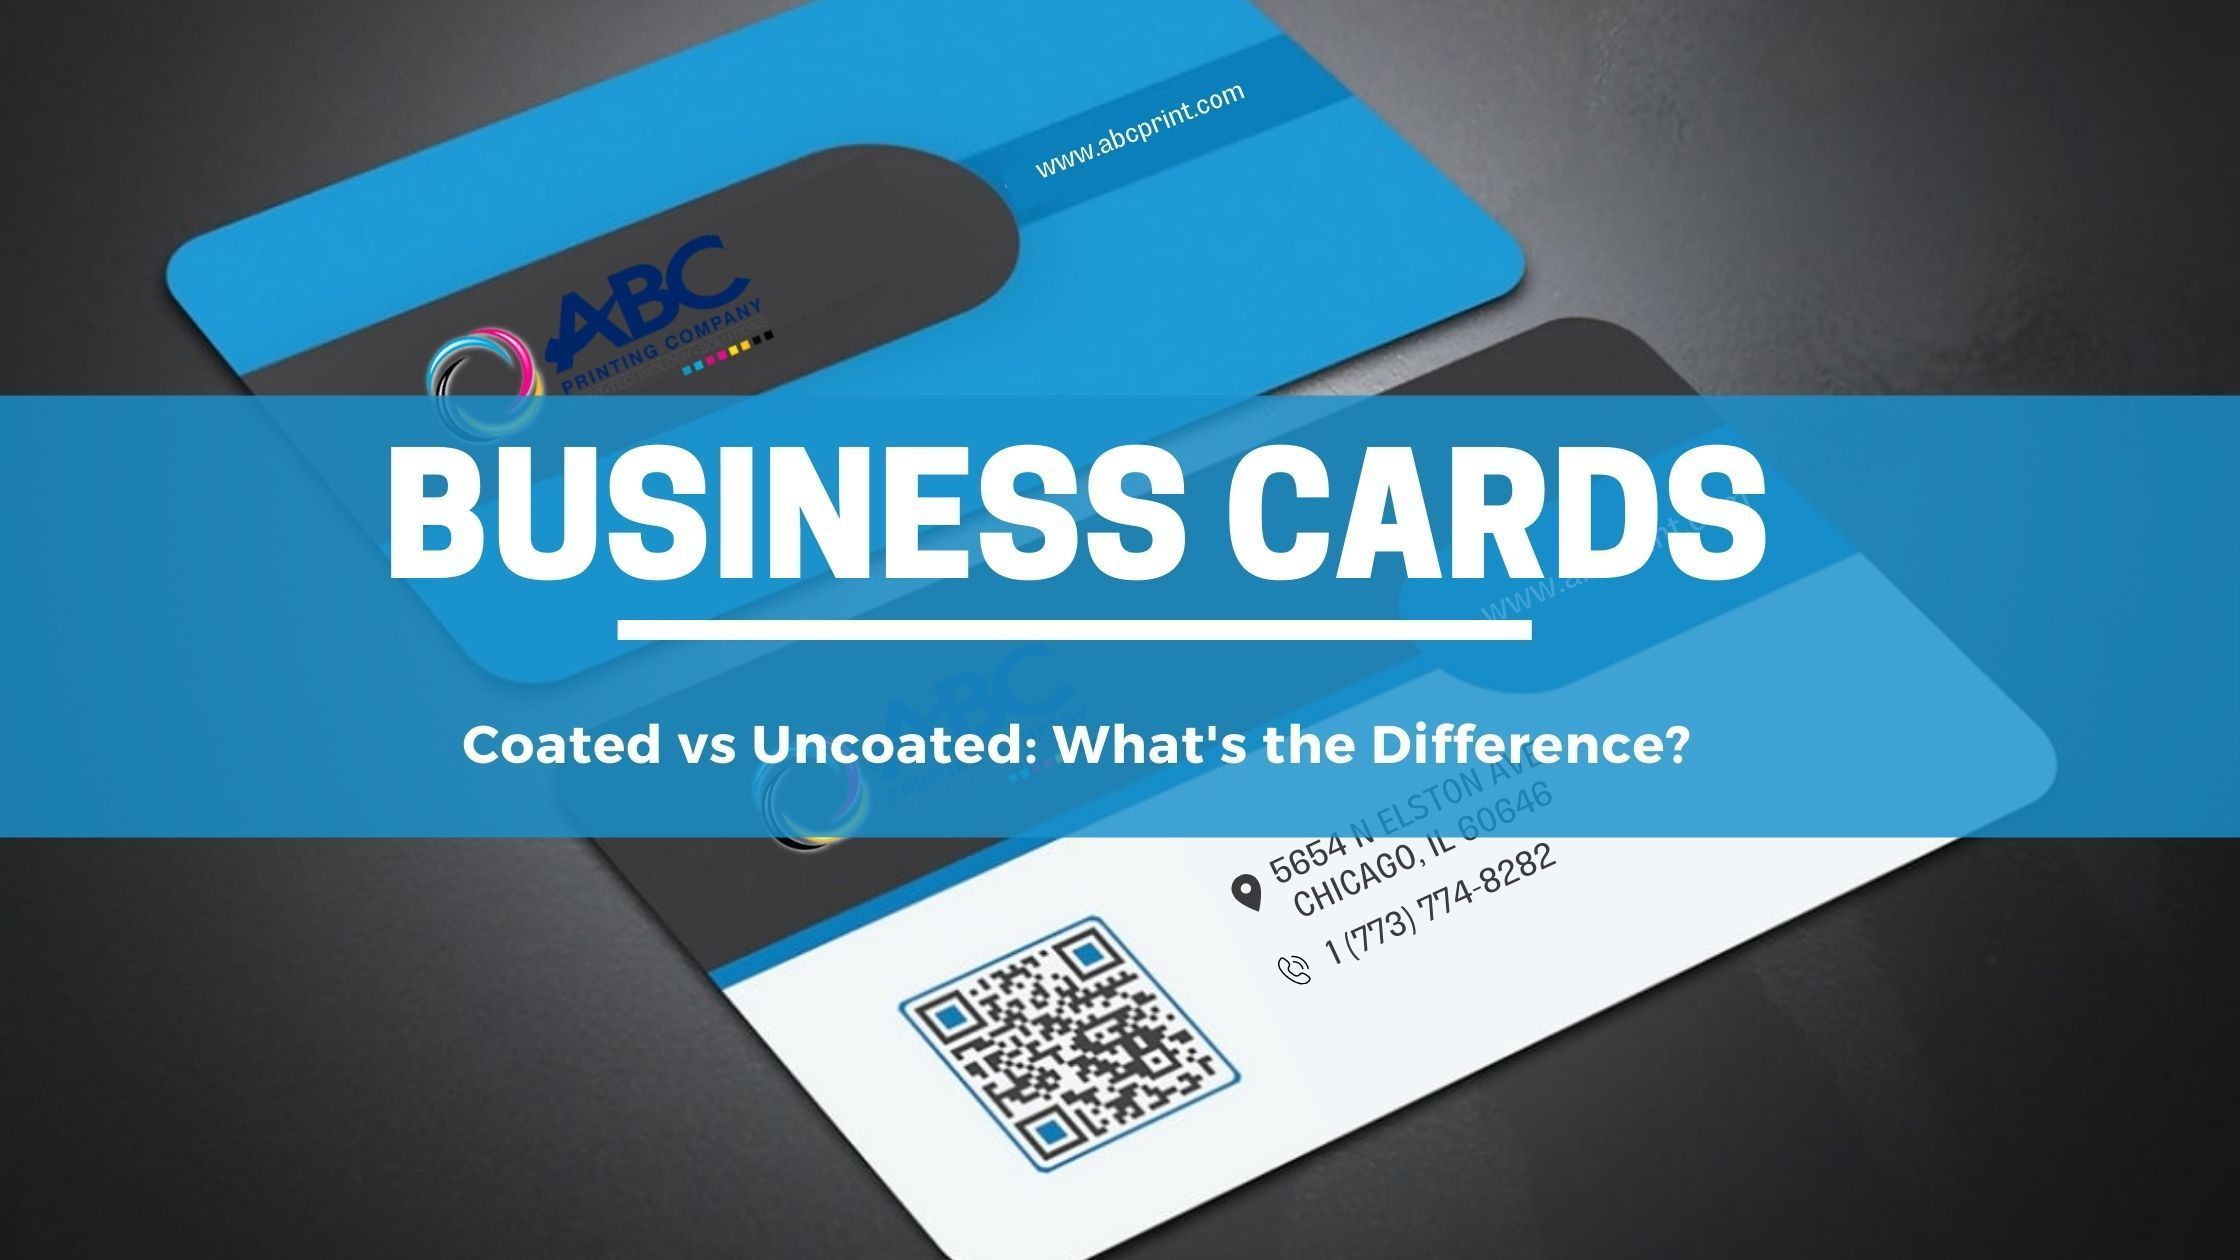 Coated vs Uncoated Business Cards